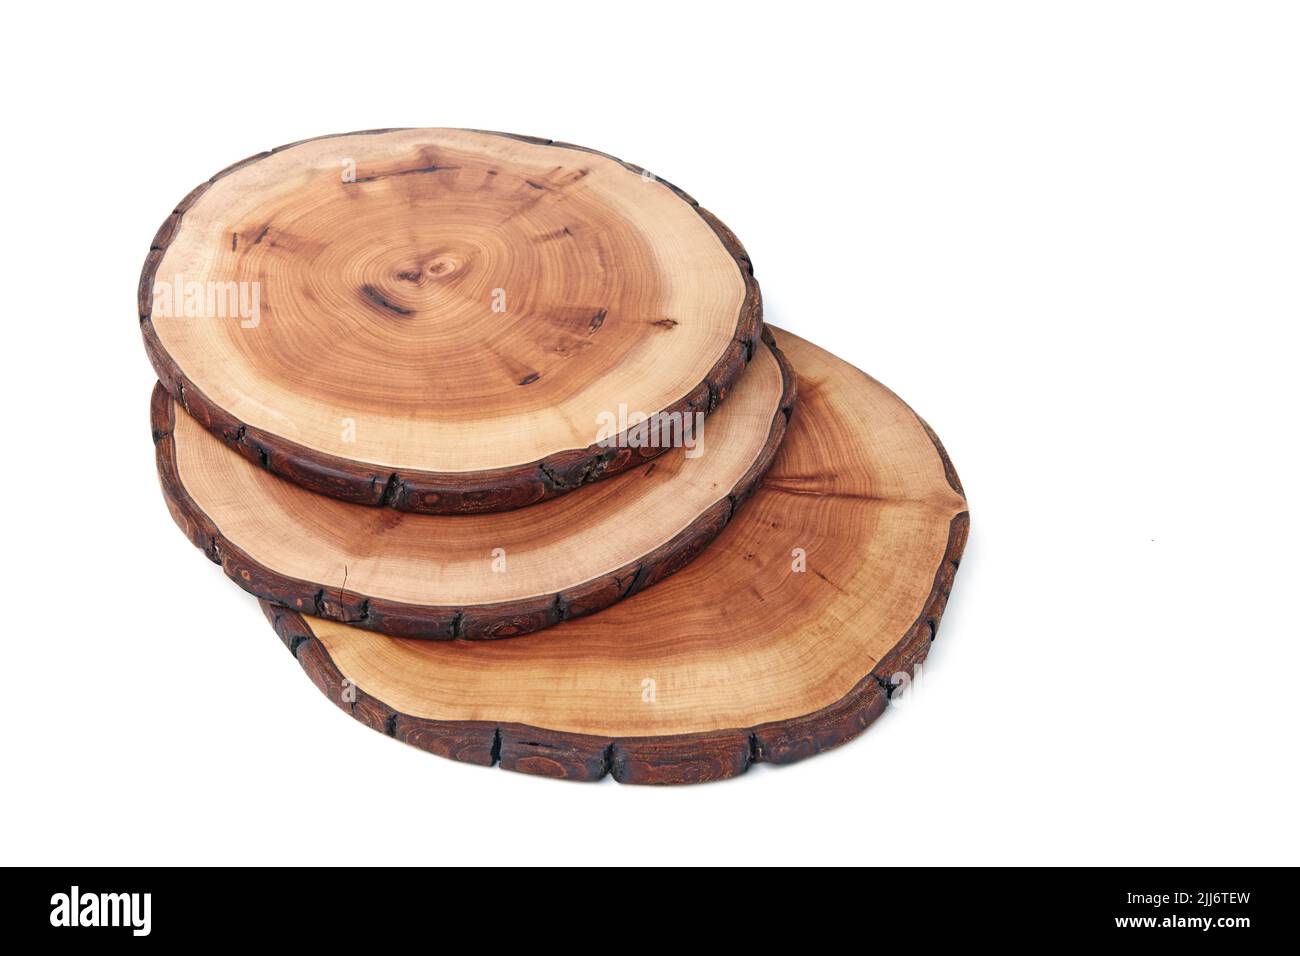 Saw cut of a tree trunk to demonstrate the presentation of the product. Stock Photo